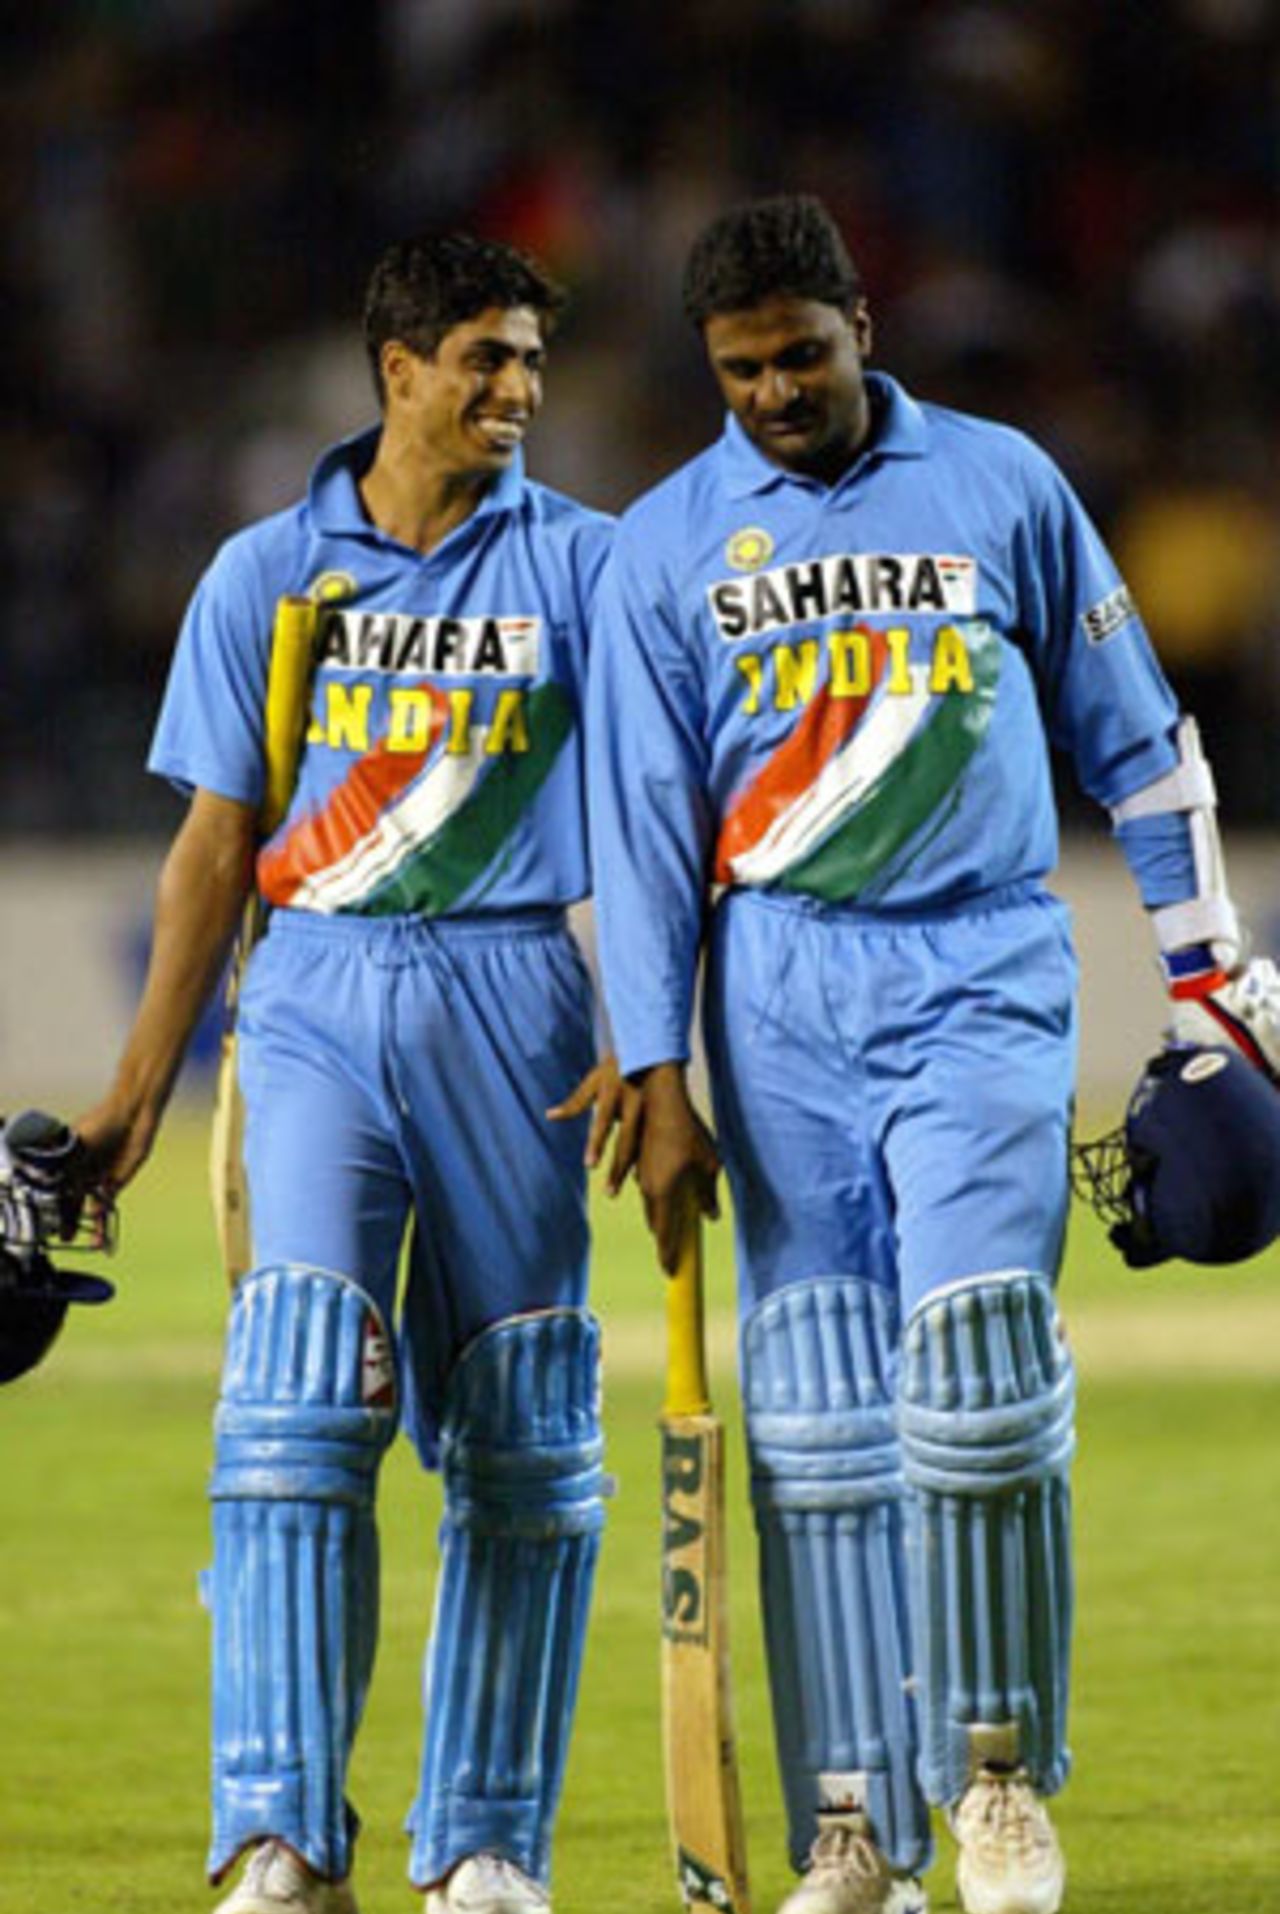 Indian batsmen Ashish Nehra (left) and Javagal Srinath celebrate as they leave the field at the end of the match. India beat New Zealand by one wicket. 6th ODI: New Zealand v India at Eden Park, Auckland, 11 January 2003.